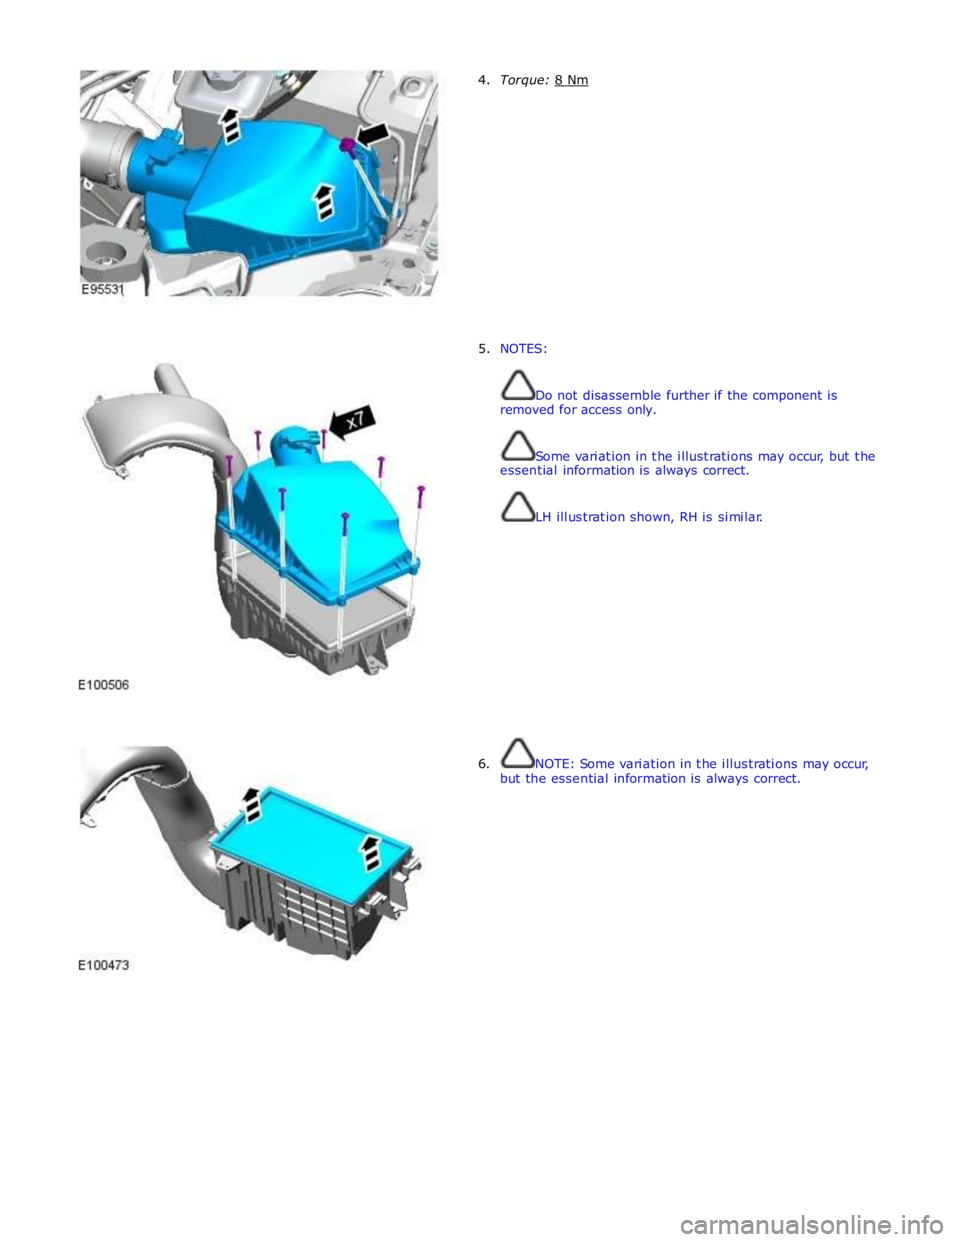 JAGUAR XFR 2010 1.G Workshop Manual  
4. Torque: 8 Nm  
 
 
 
 
 
 
 
 
 
 
 
 
 
 
 
5. NOTES: 
 
 
Do not disassemble further if the component is 
removed for access only. 
 
 
Some variation in the illustrations may occur, but the 
e